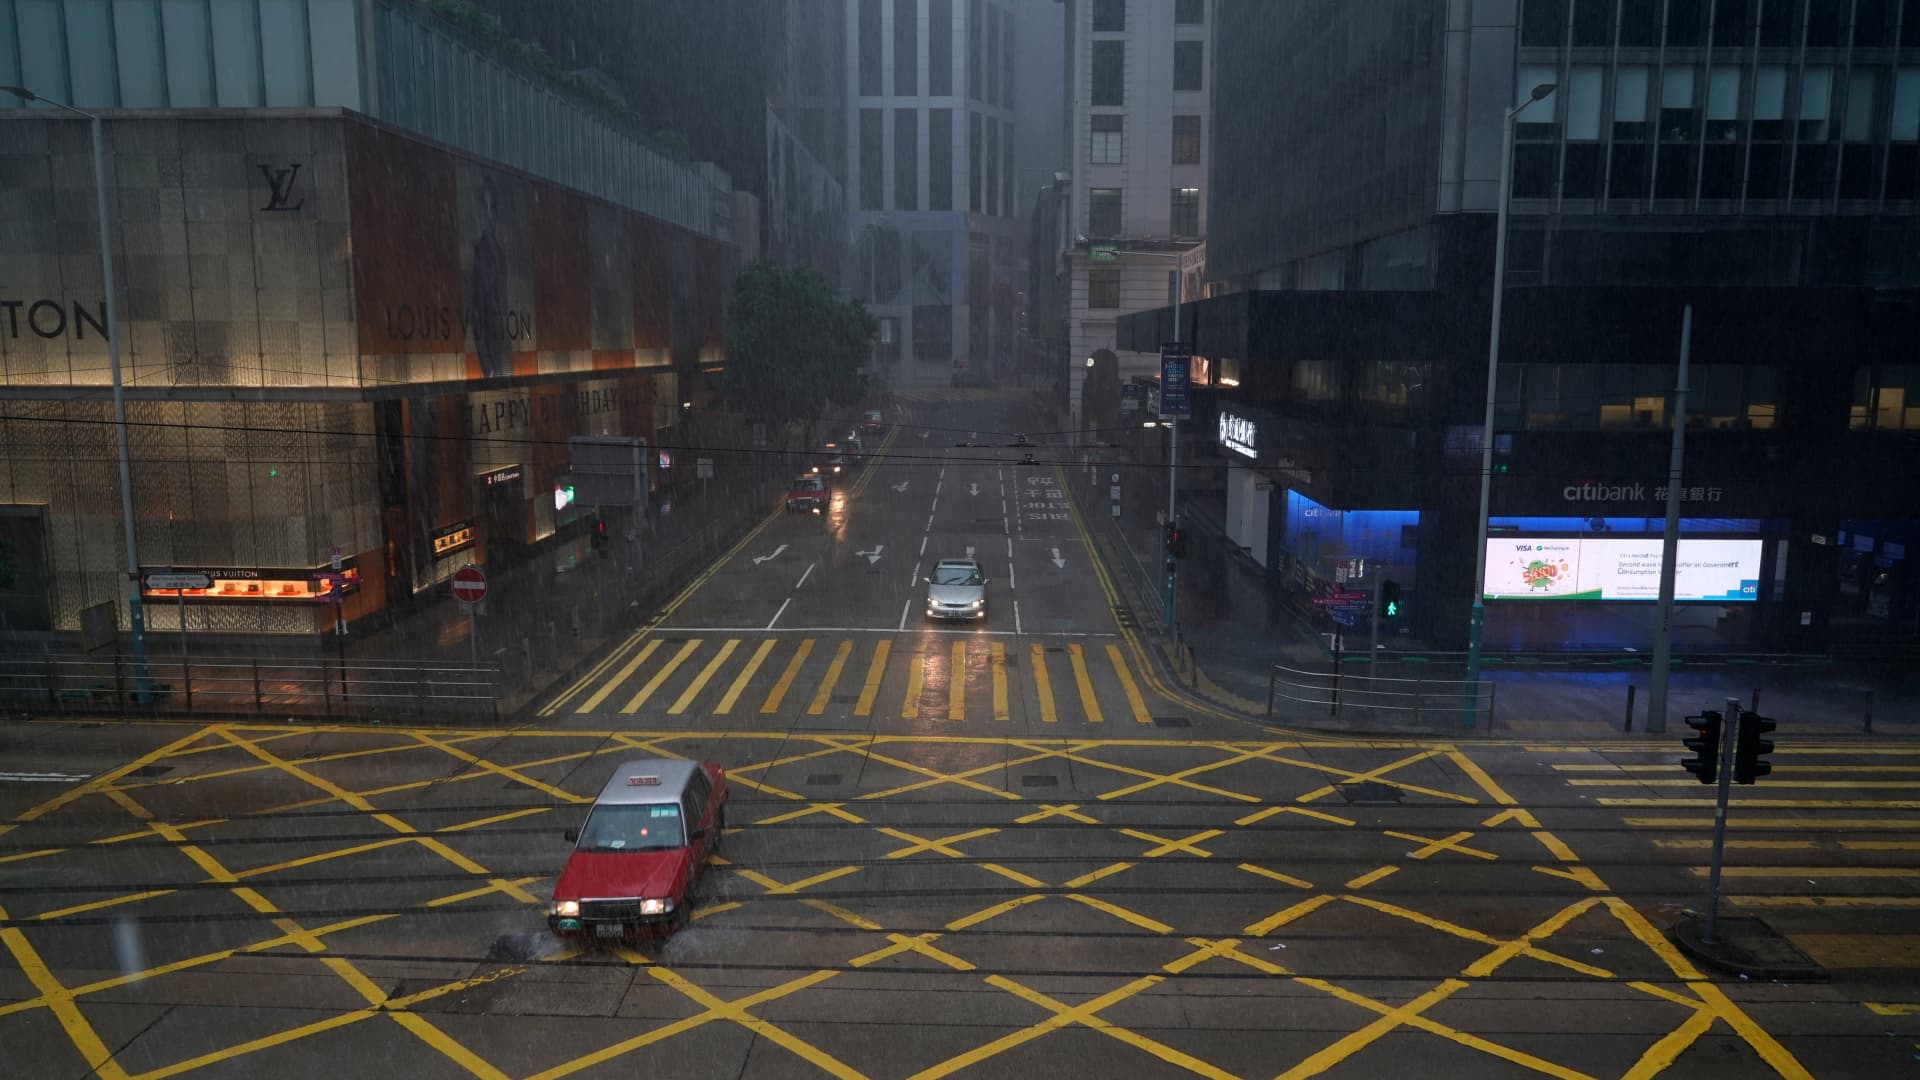 Hong Kong's stock markets continue to trade during typhoons, as of September 23